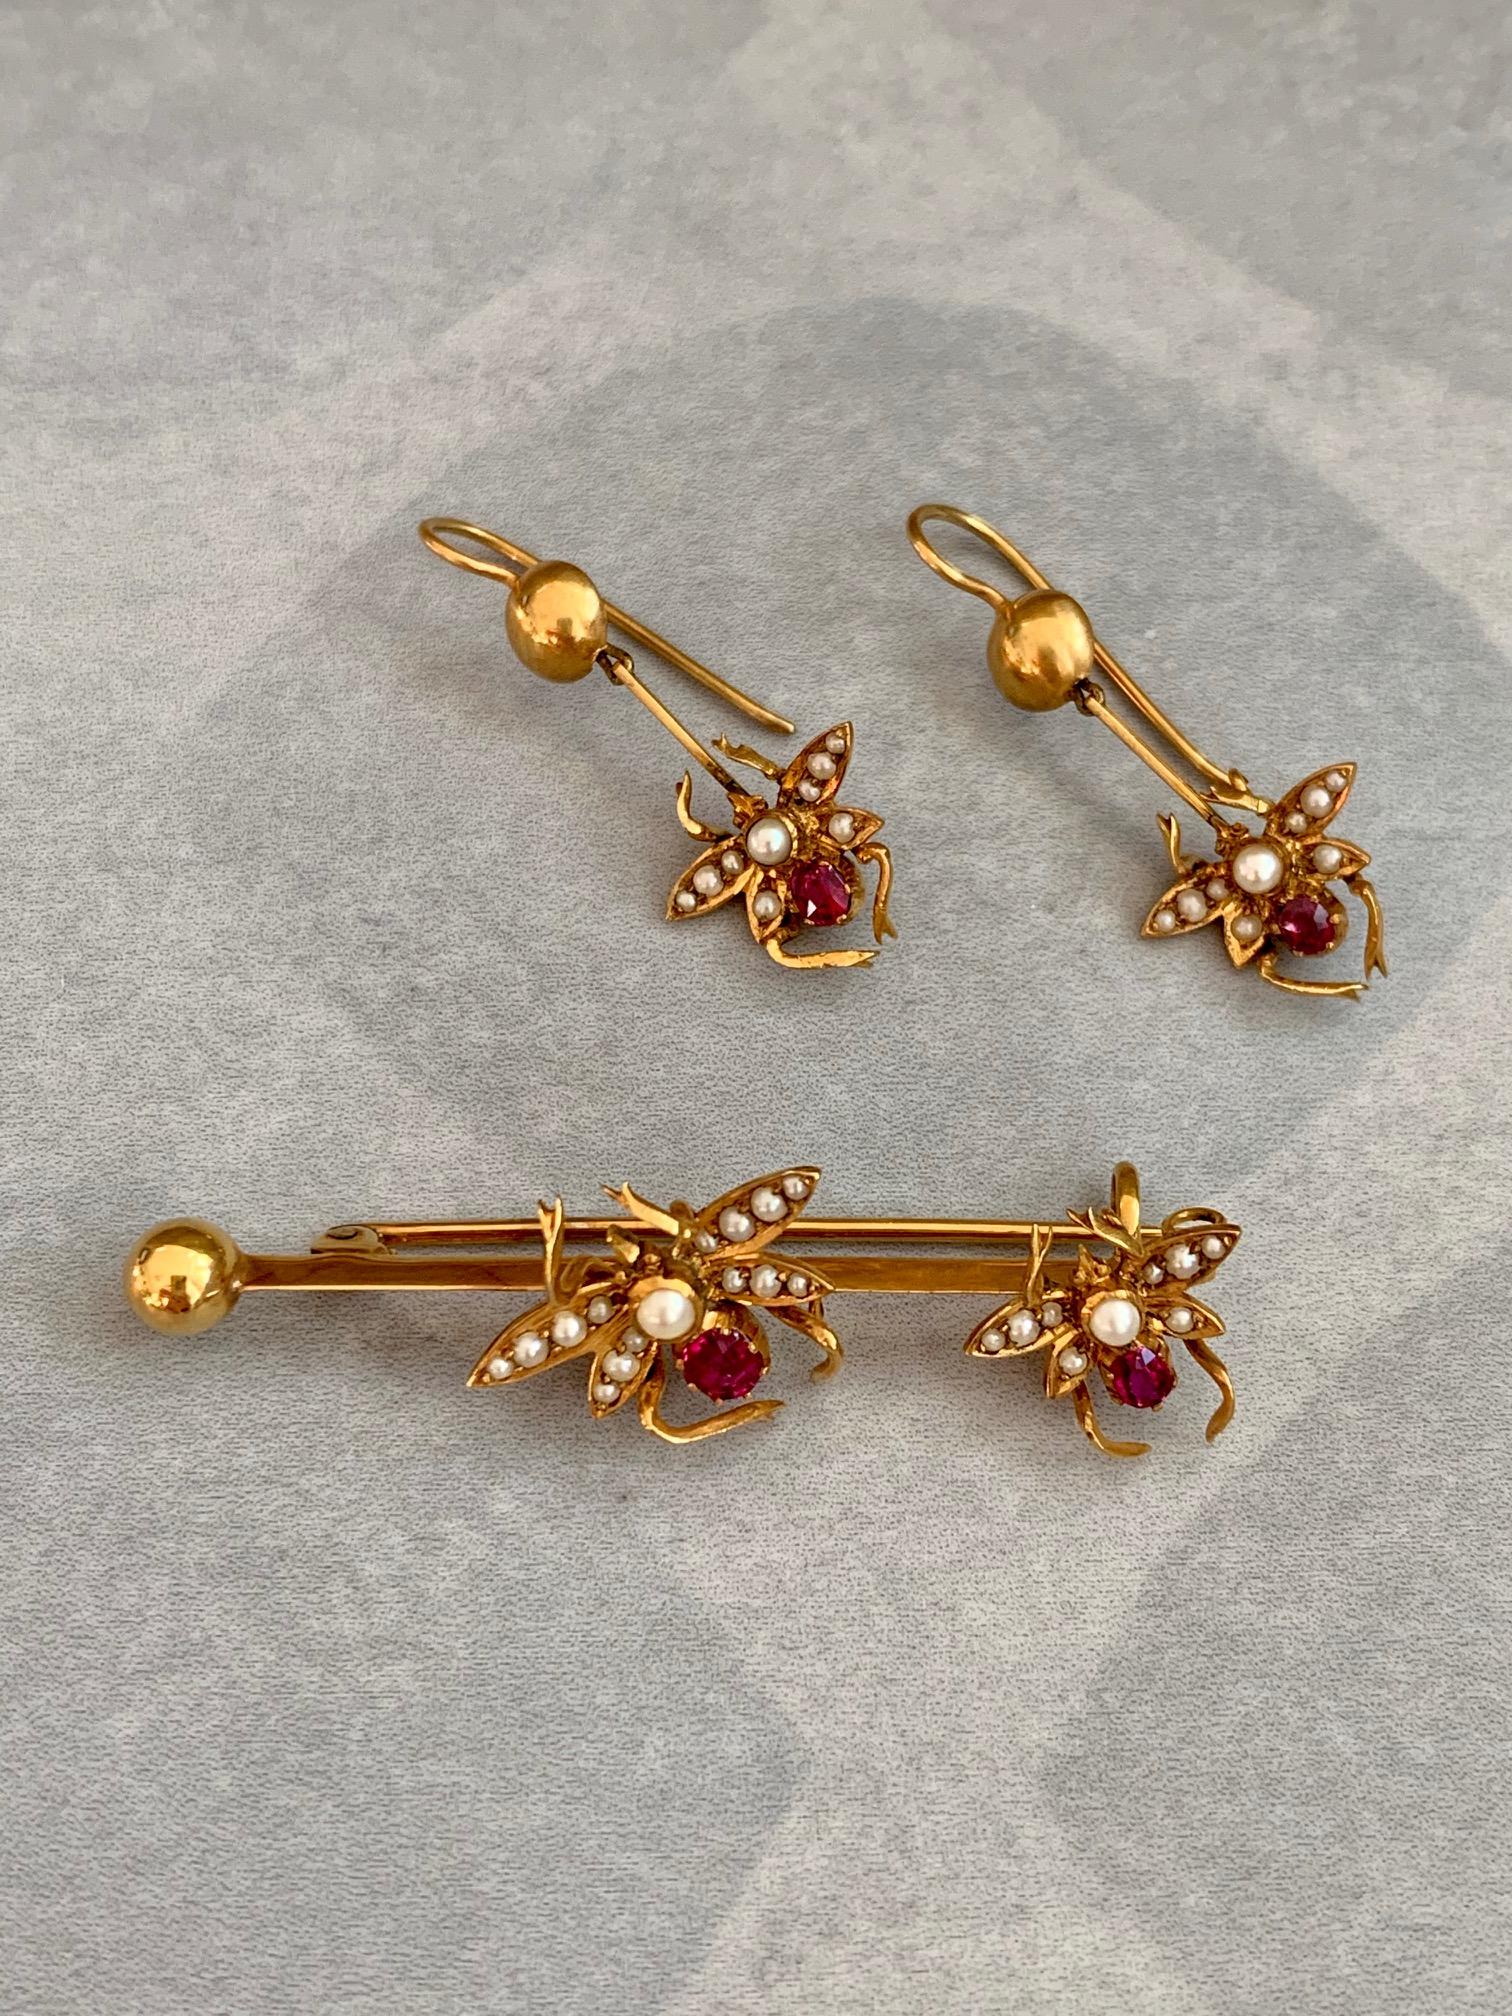 Vintage Gold Insect Pin and Earring Set In Excellent Condition In St. Louis Park, MN